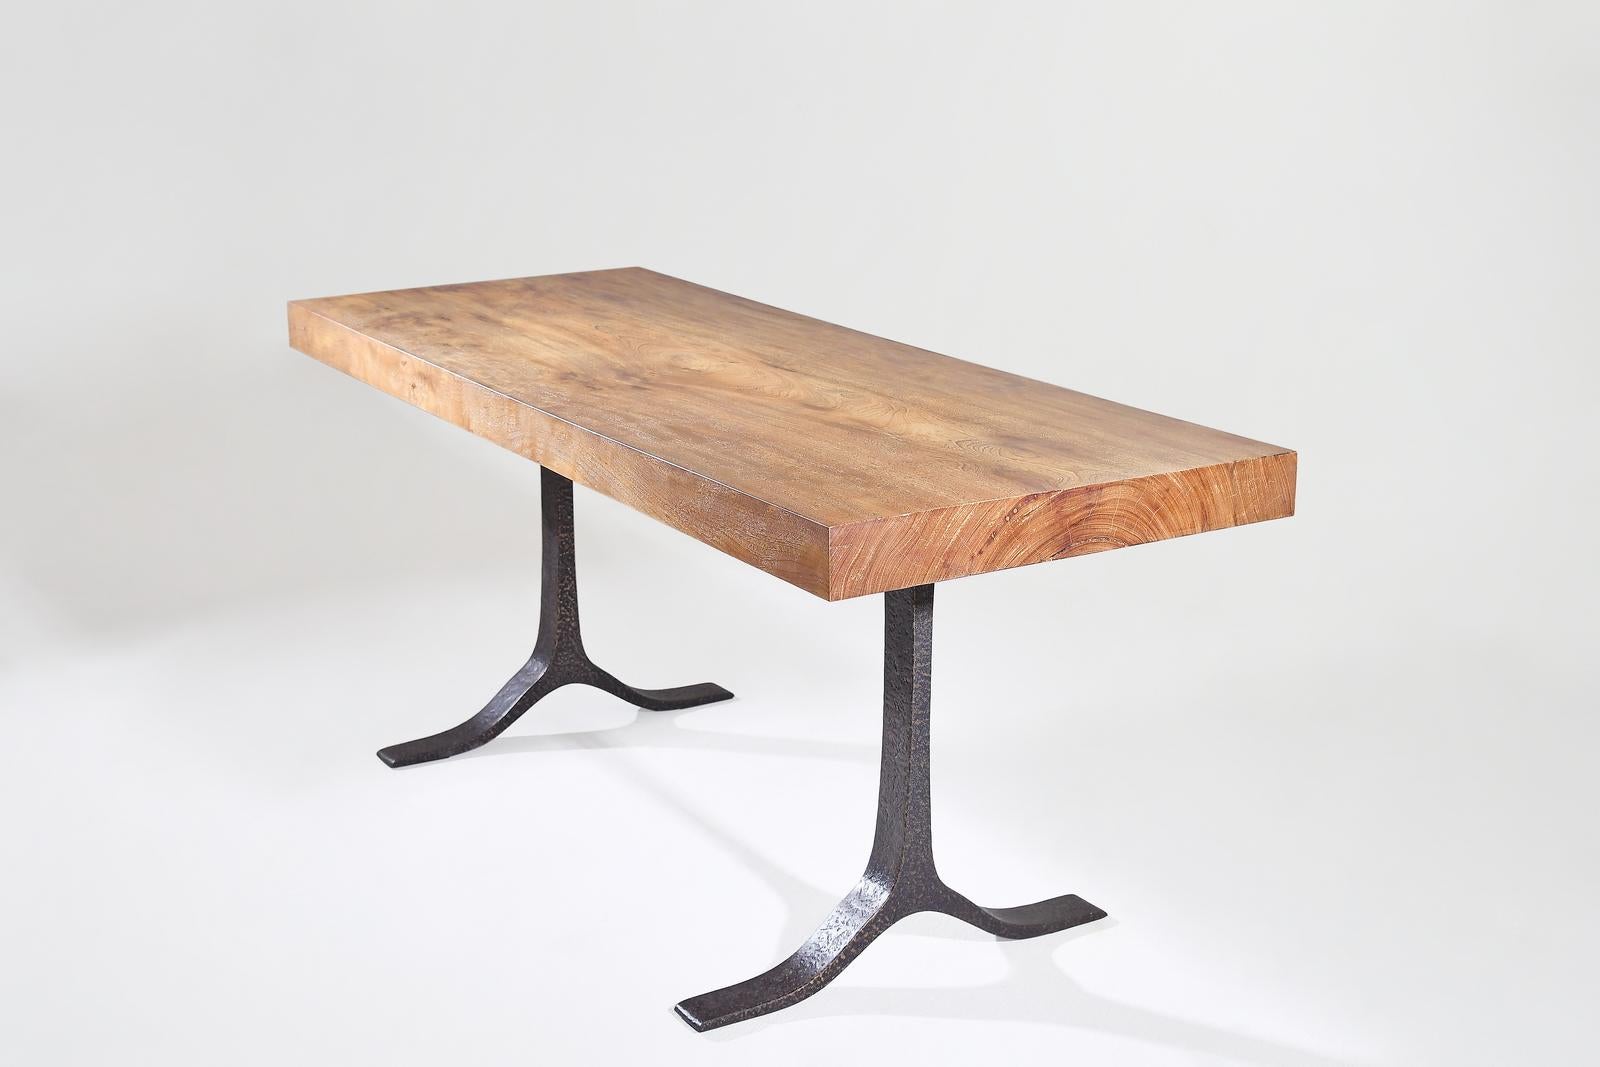 A client commissioned a desk which hearken back to the Chinese heritage of using a single slab of Chicken Wing Wood collection as a table top. This wood has a unique grain “like feathers of a bird”, hence named “Chicken-Wing” by the Chinese. The